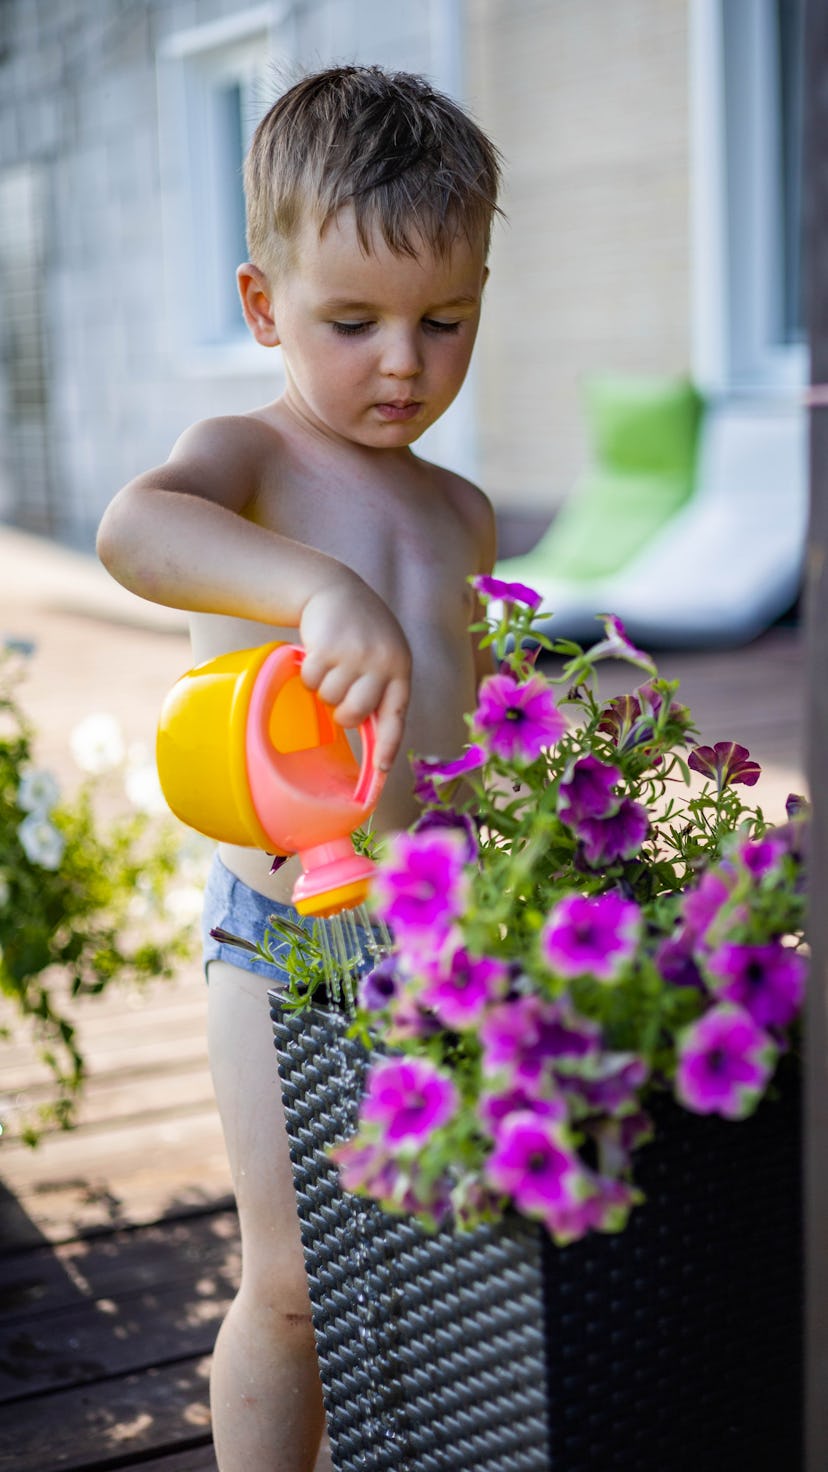 The kid takes care of flowers and plants on the terrace of his own home. Watering carrots, dill and ...